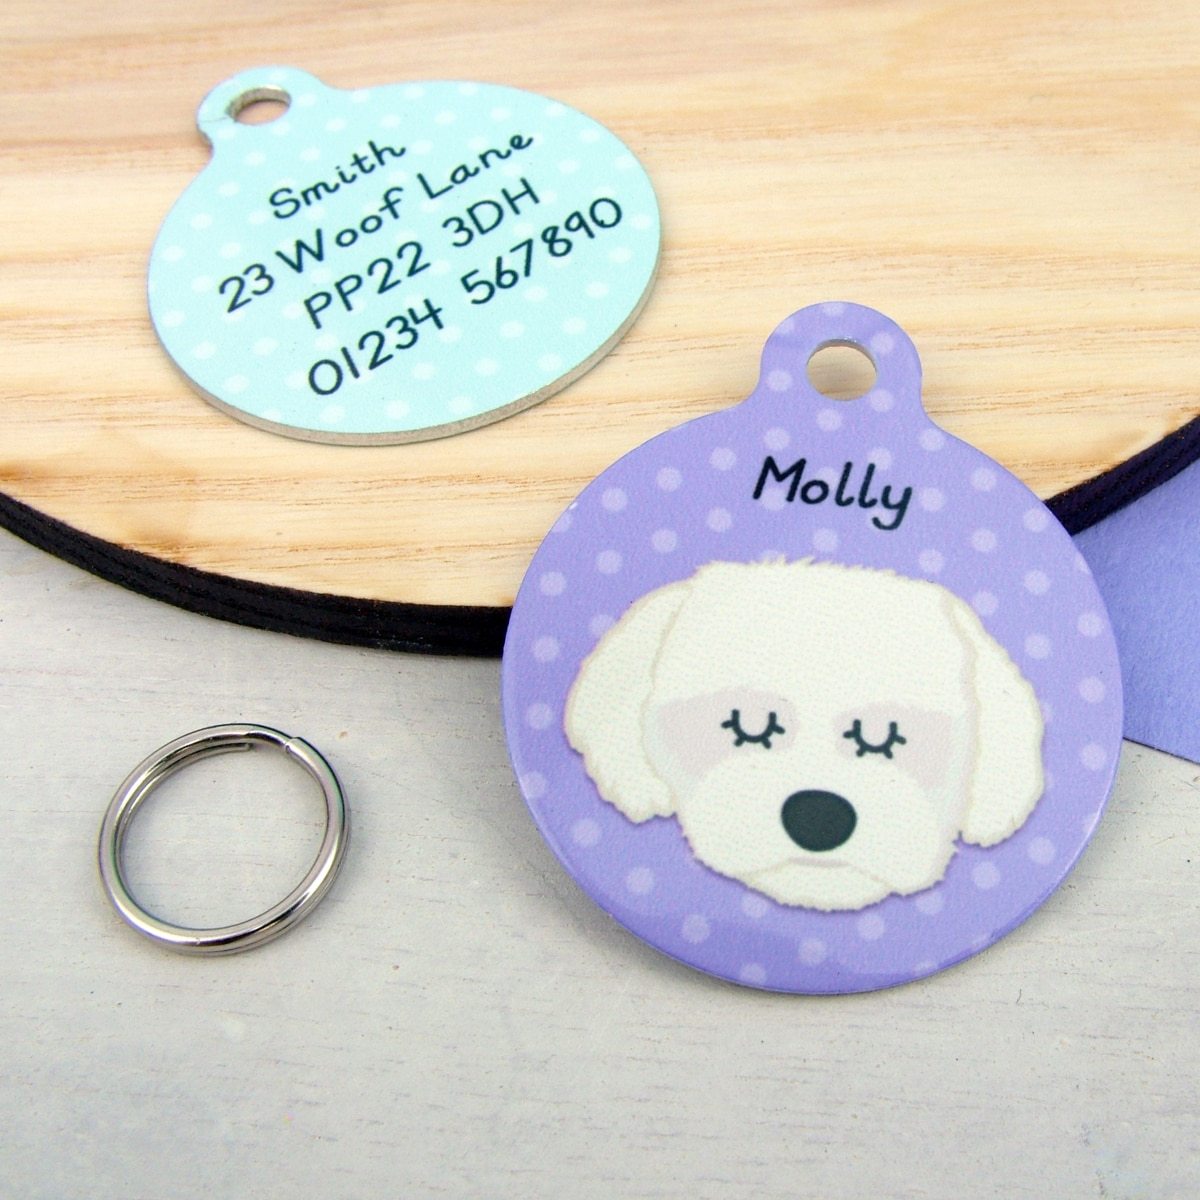 Coton Du Tulear/Maltese Terrier Personalised Dog ID Tag  - Hoobynoo - Personalised Pet Tags and Gifts